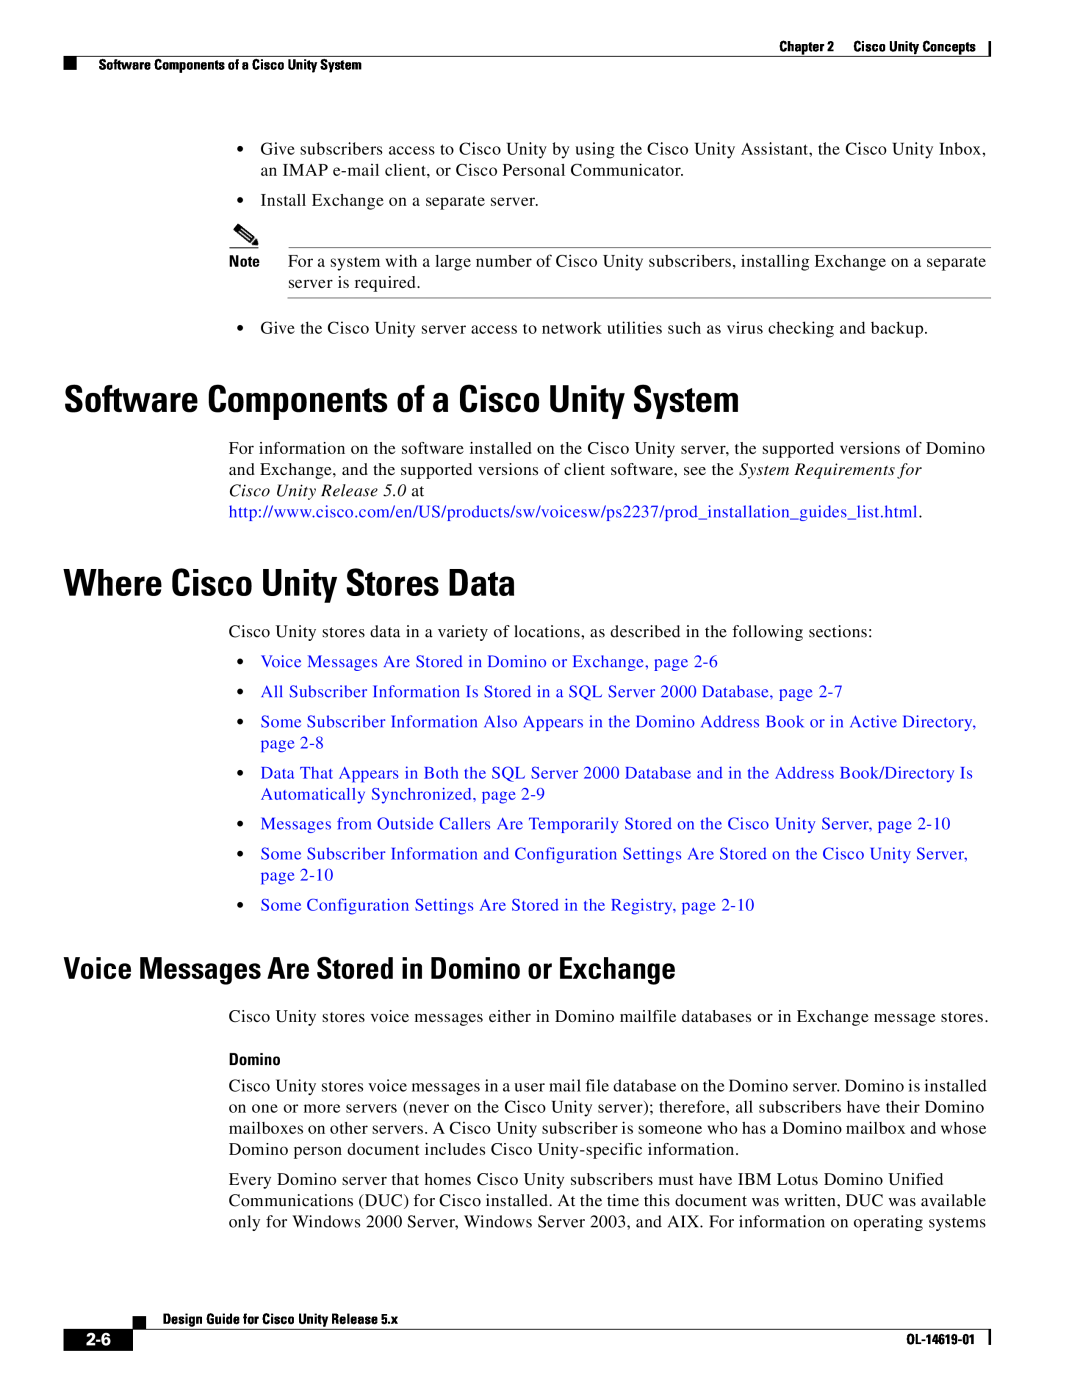 Cisco Systems OL-14619-01 manual Software Components of a Cisco Unity System, Where Cisco Unity Stores Data, Domino 